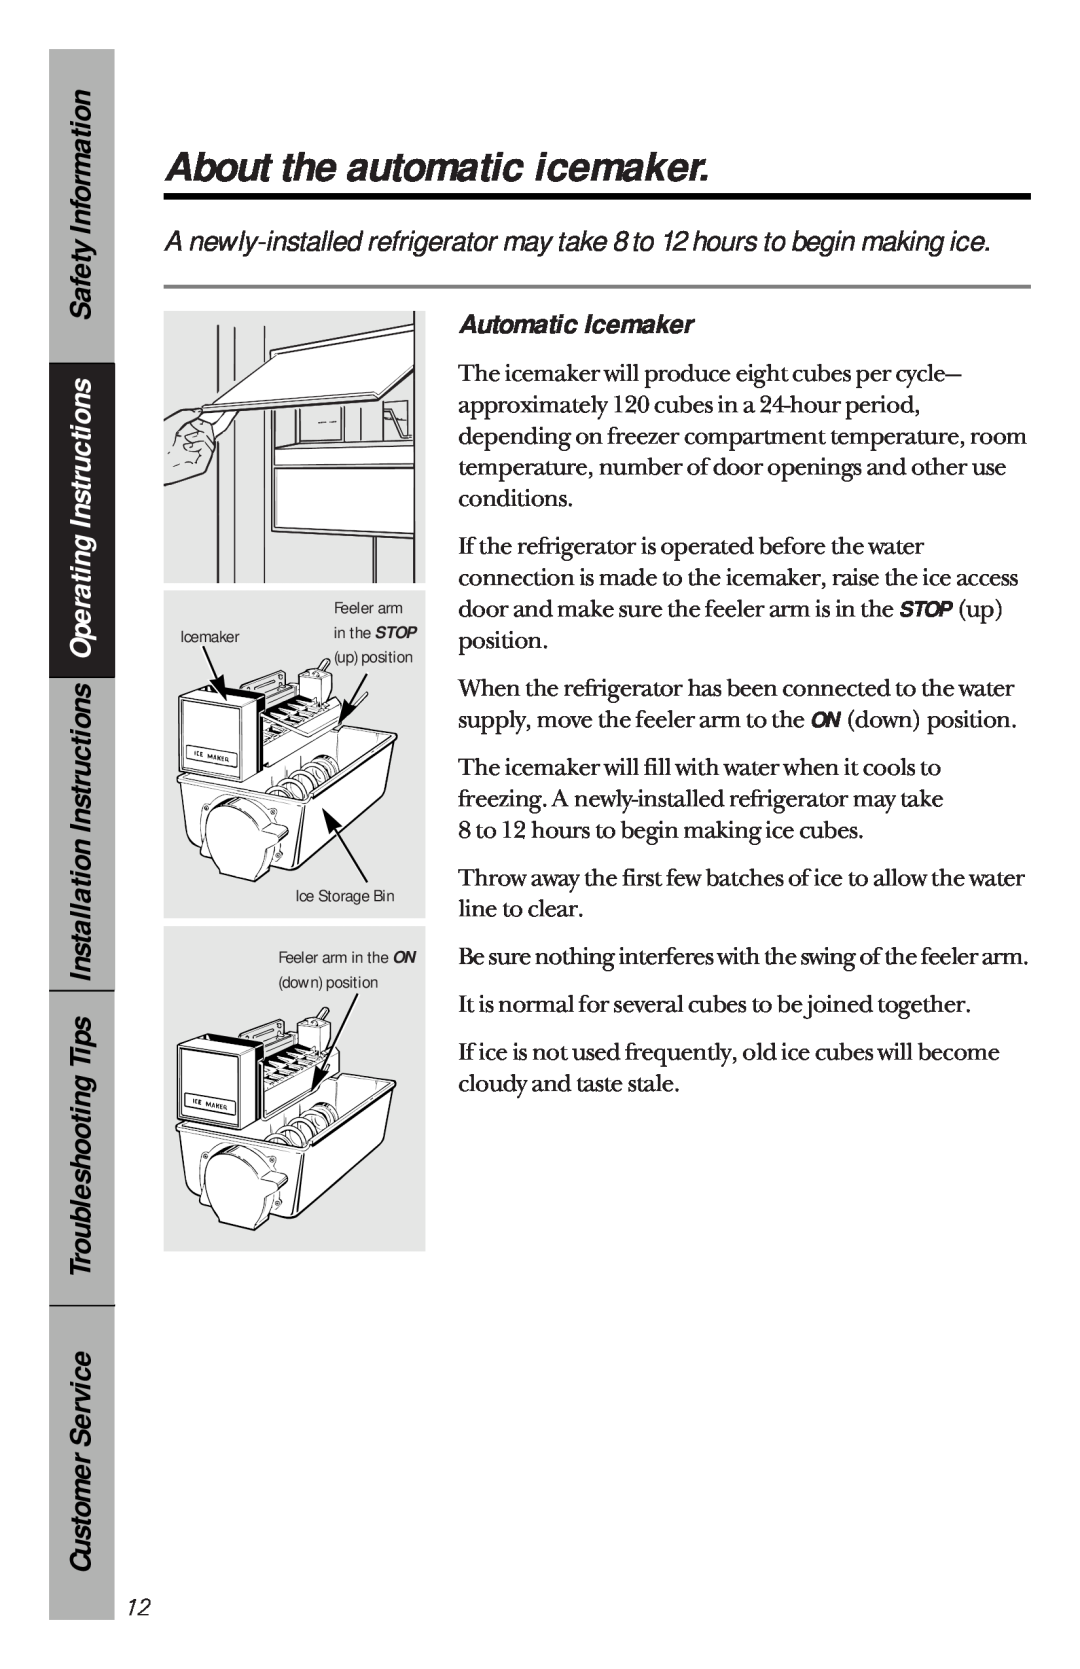 GE 162D3941P005 owner manual About the automatic icemaker, Safety Information, Automatic Icemaker 